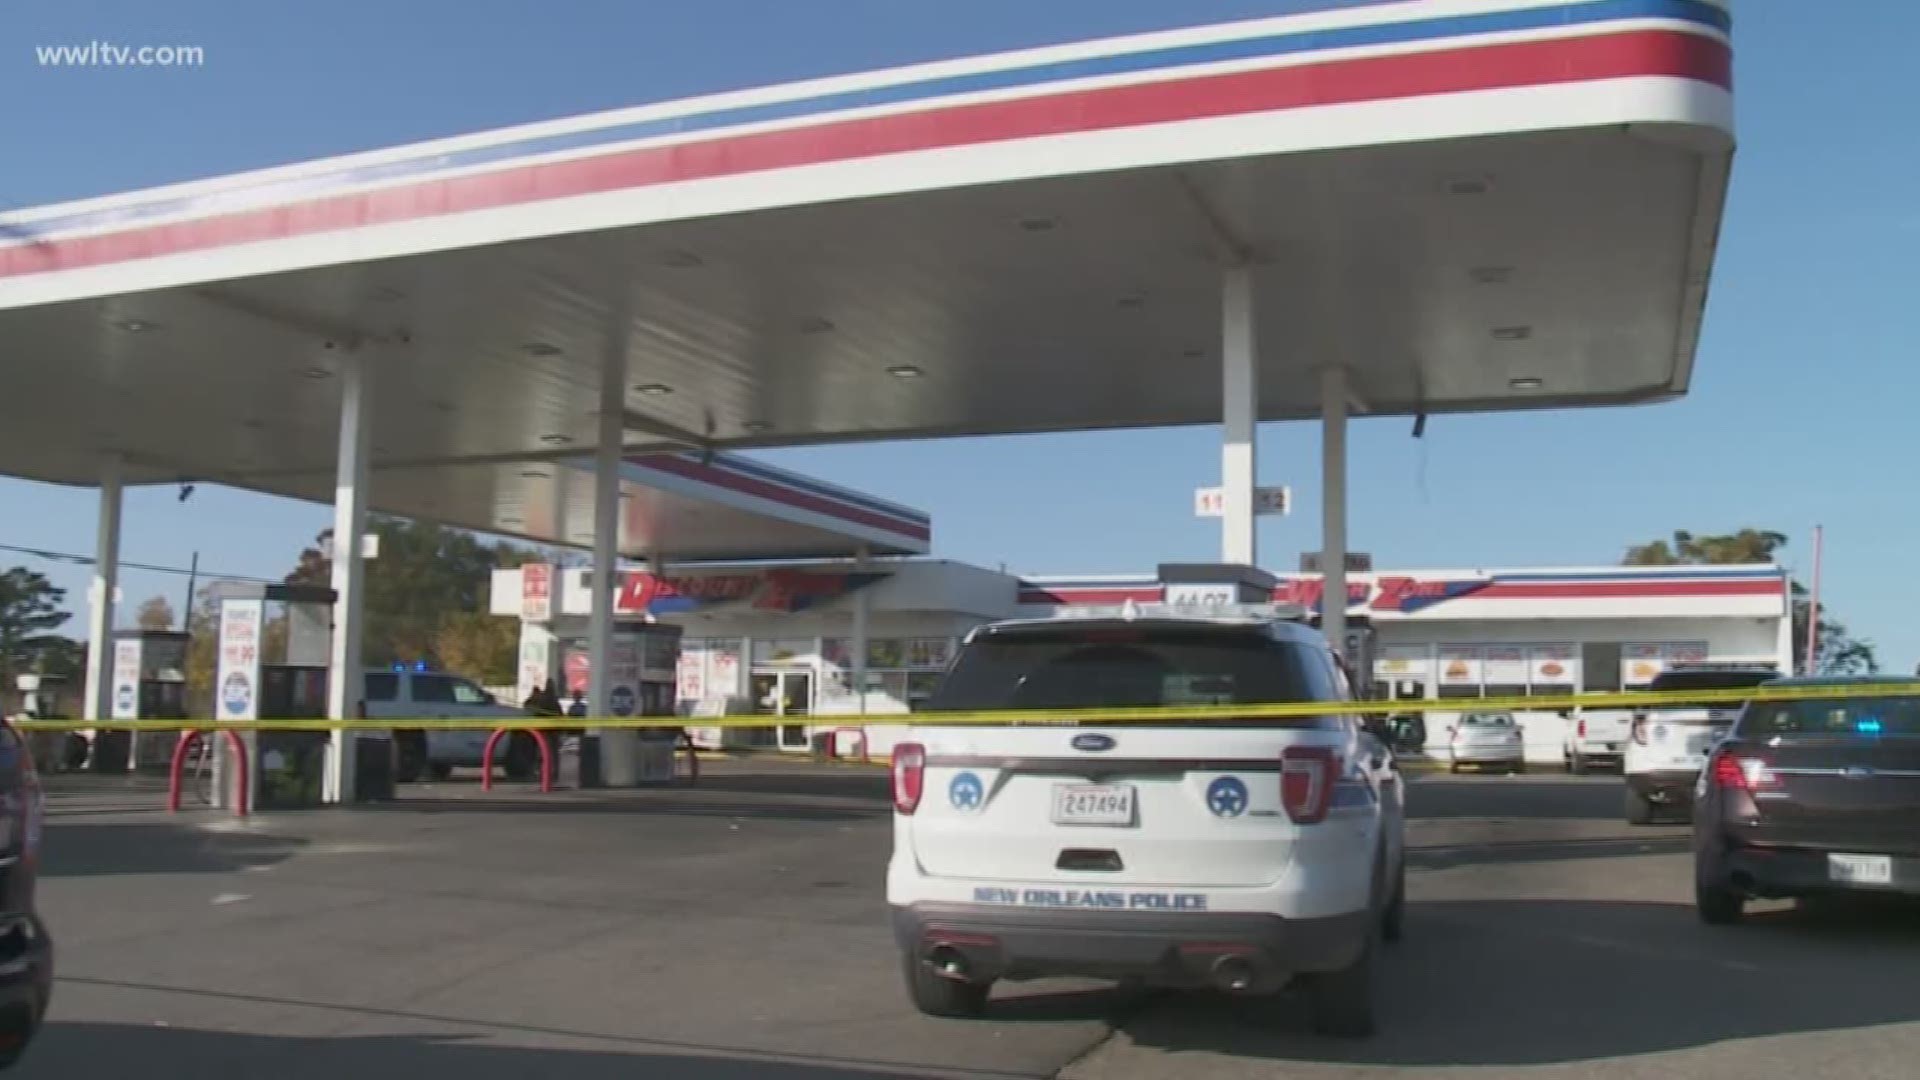 According to NOPD, a man was shot and wounded at a gas station in the 6700 block of Chef Menteur Highway.